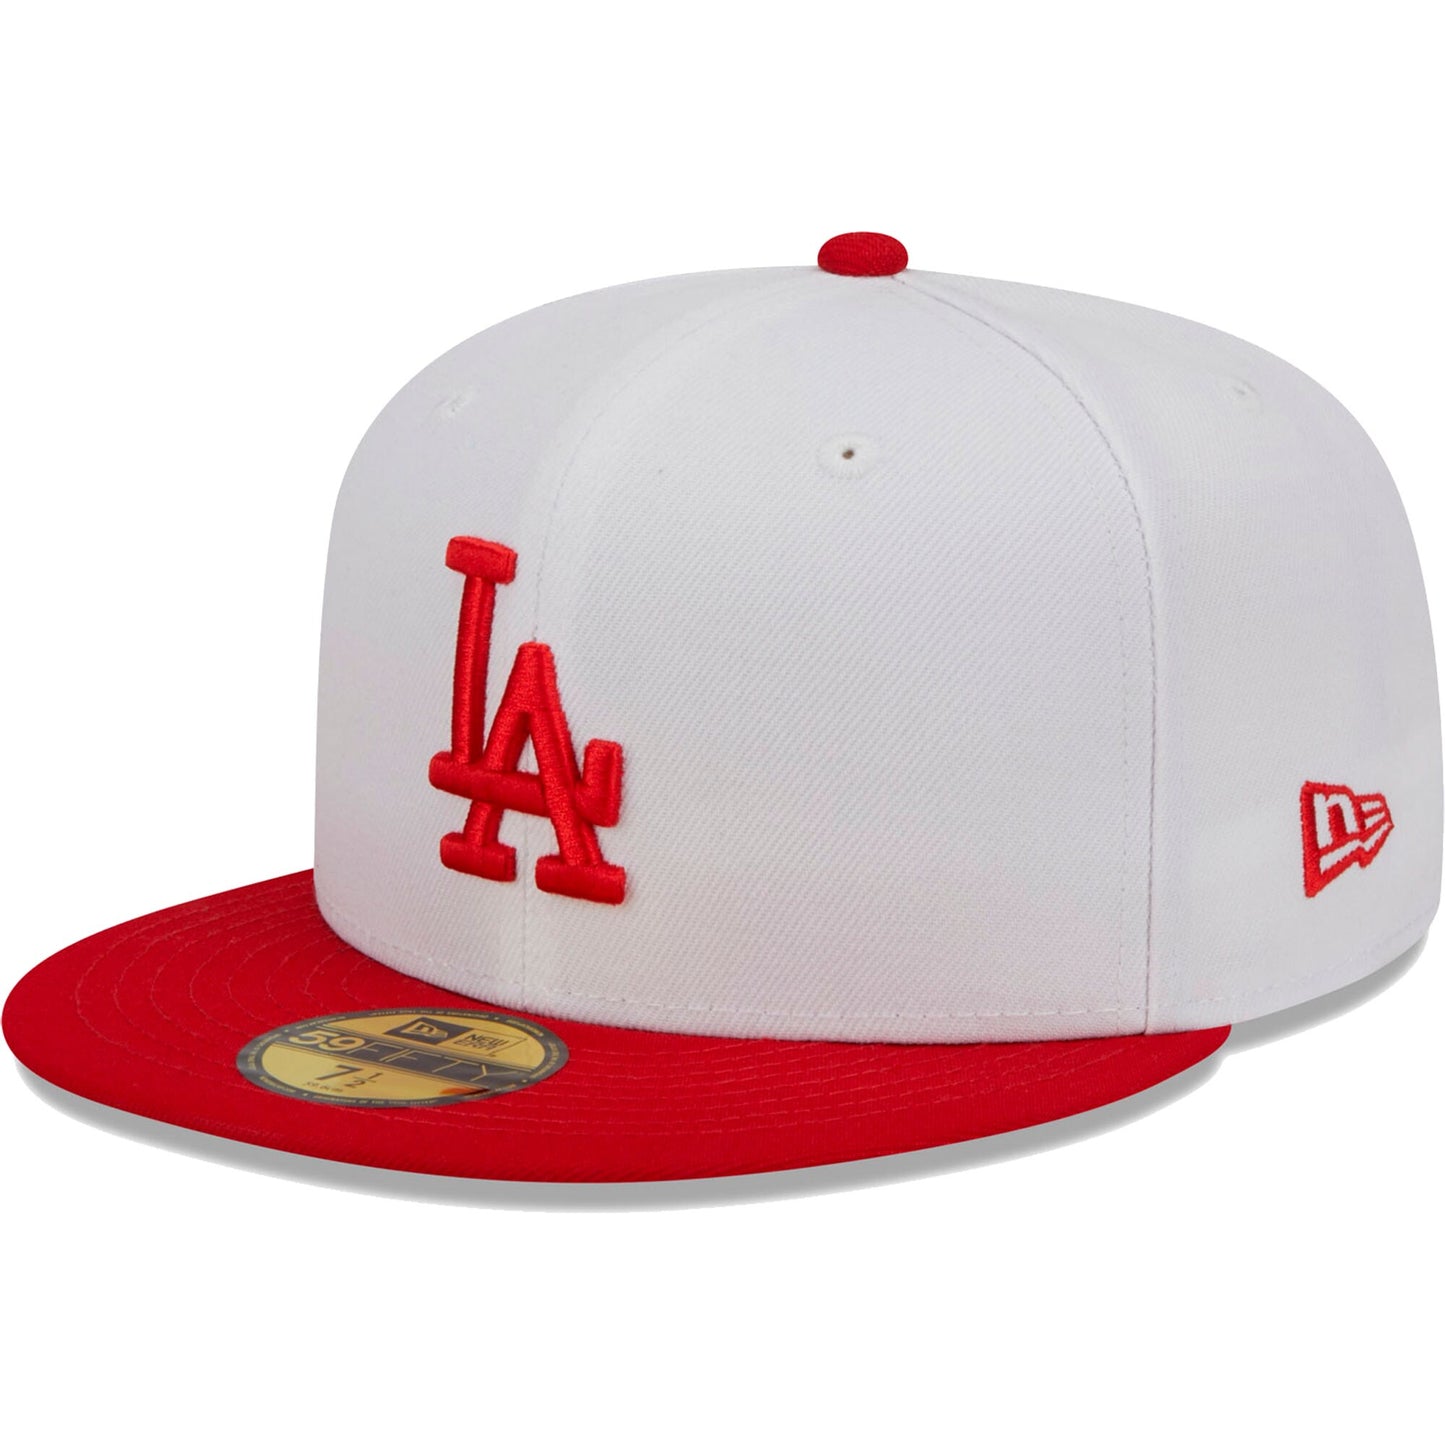 Los Angeles Dodgers New Era Optic 59FIFTY Fitted Hat - White/Red